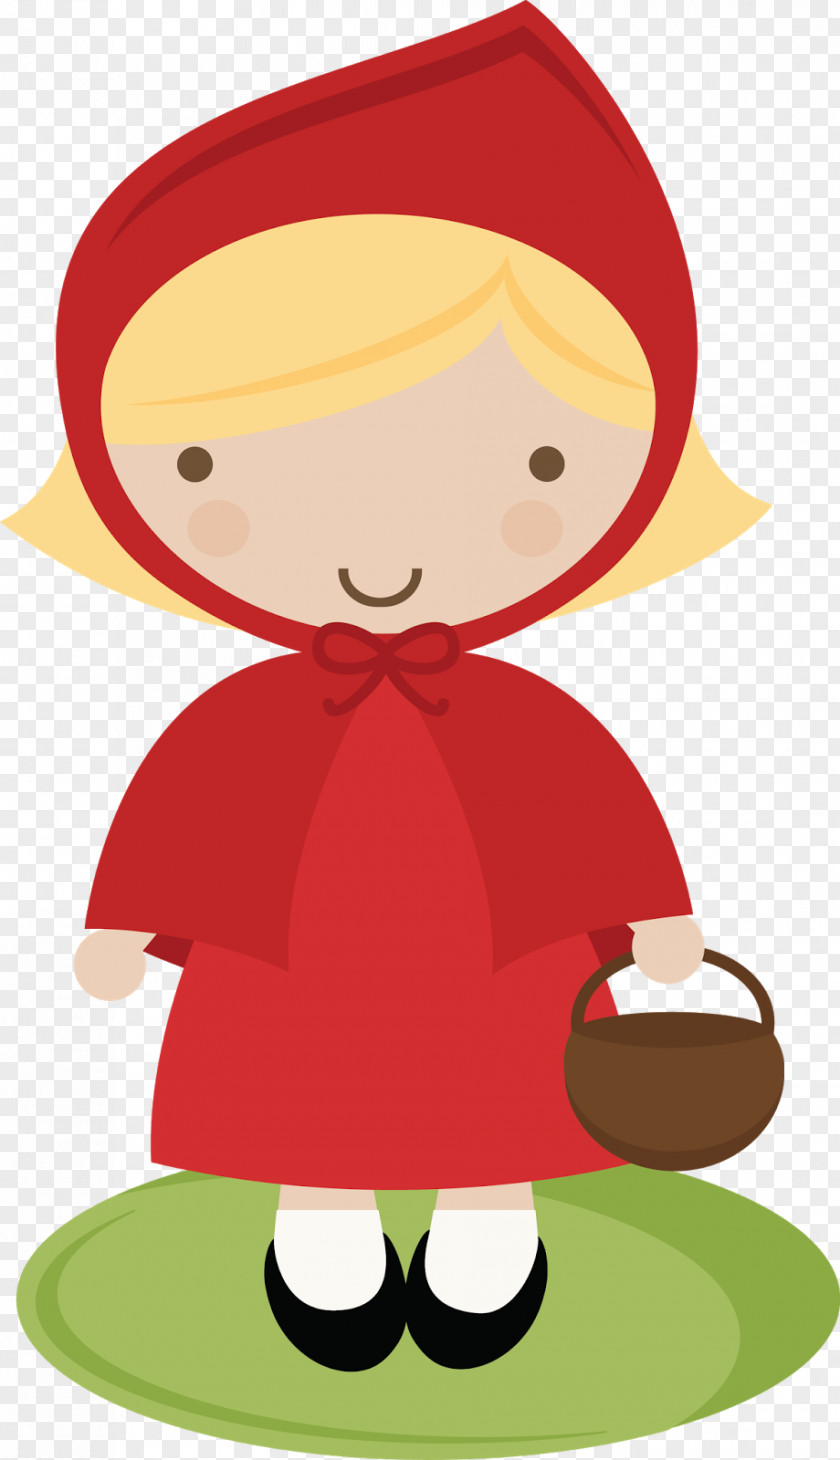 Creamsicle Cliparts Big Bad Wolf Little Red Riding Hood Goldilocks And The Three Bears Clip Art PNG